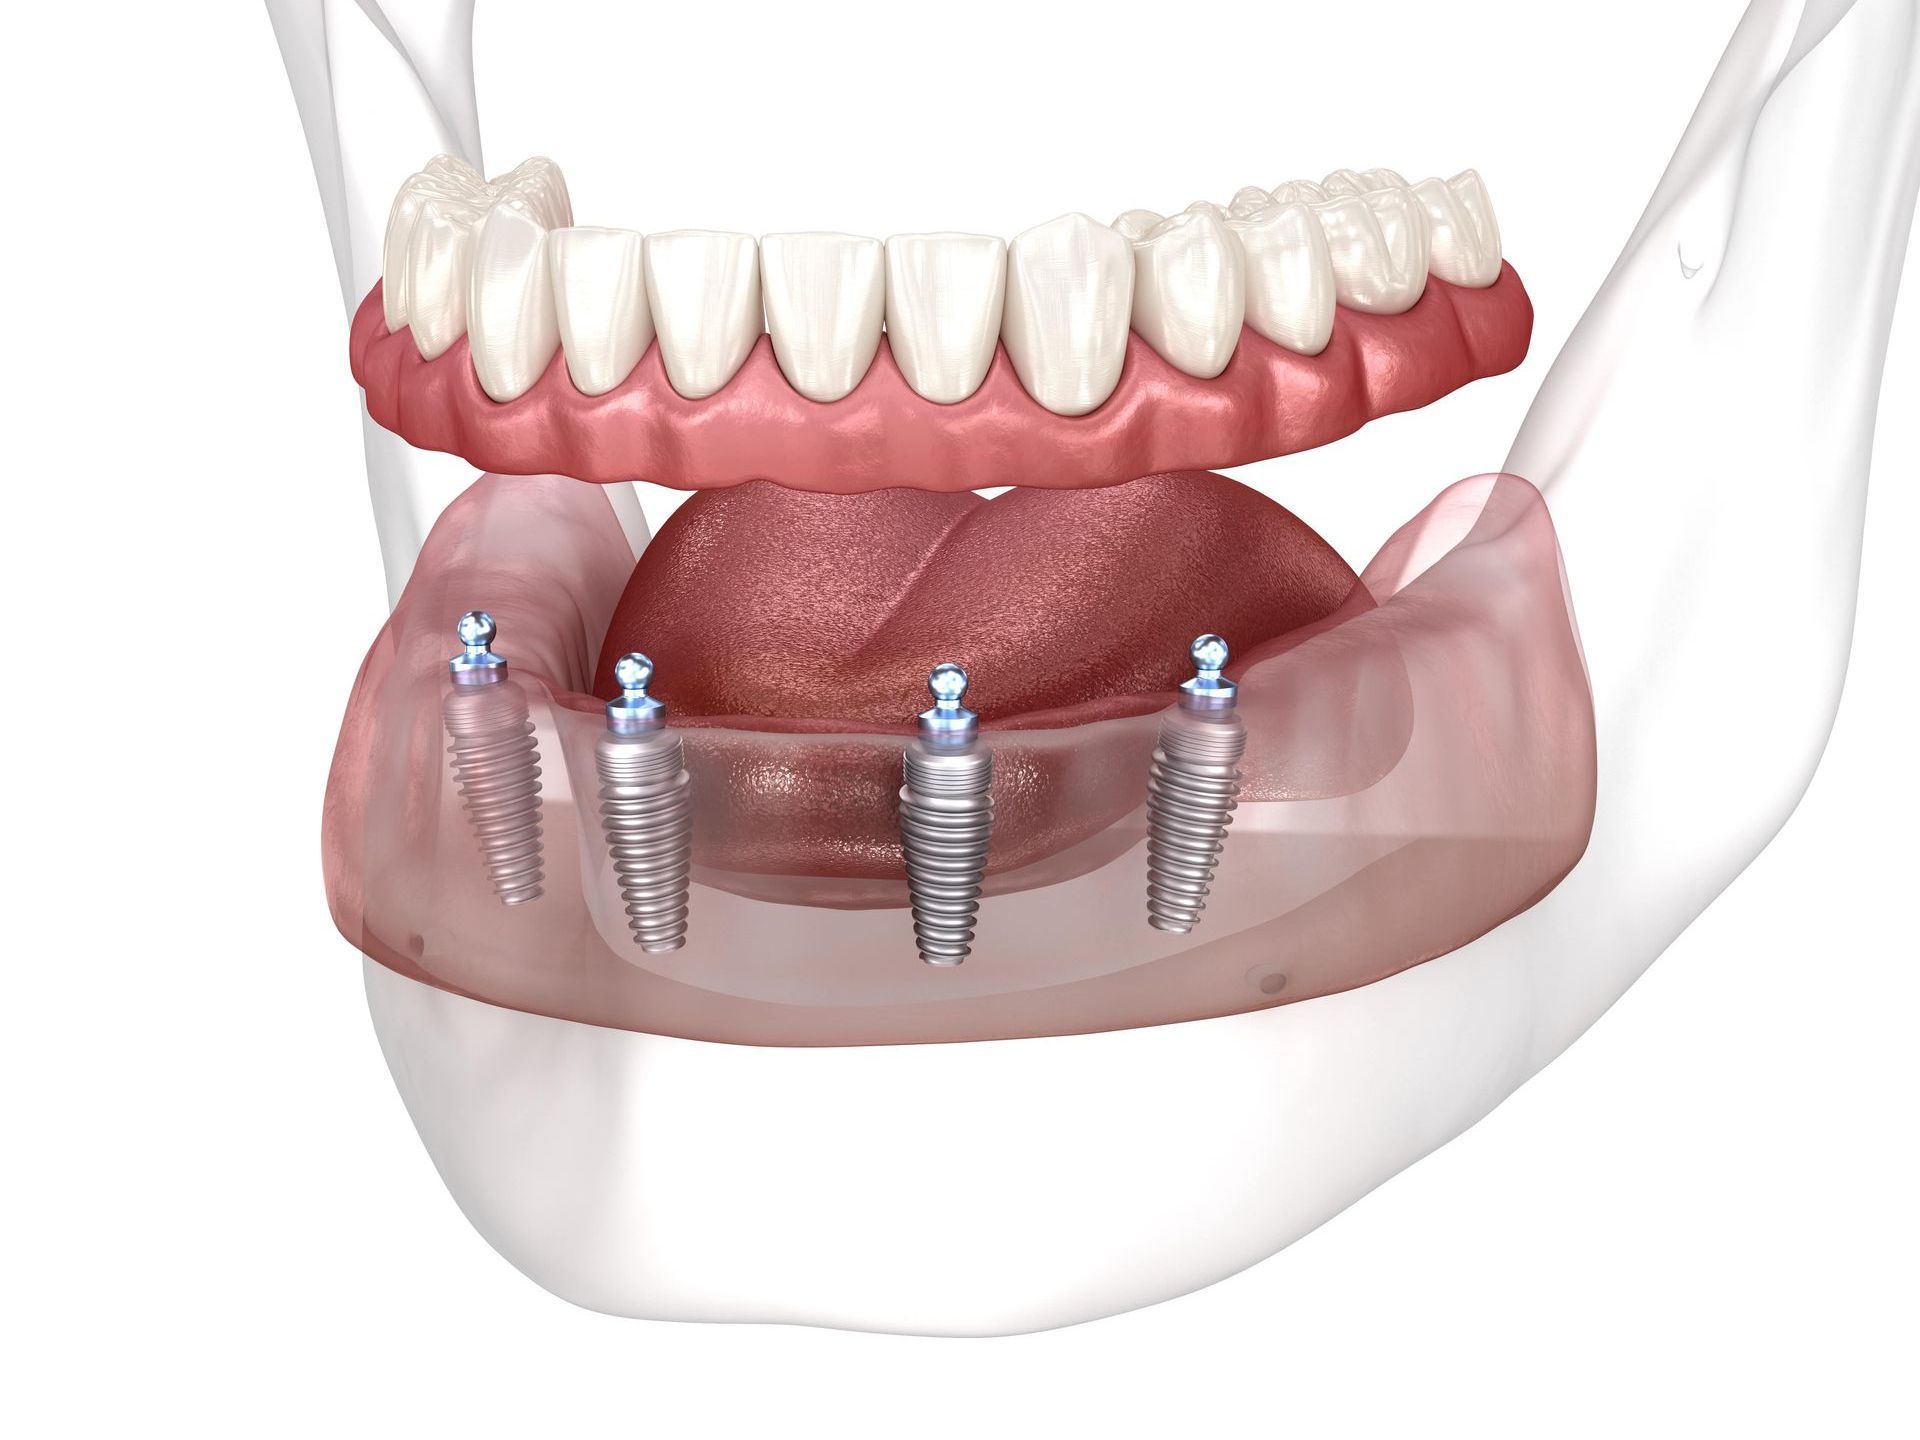 A computer generated image of a full arch all-on-4 implant